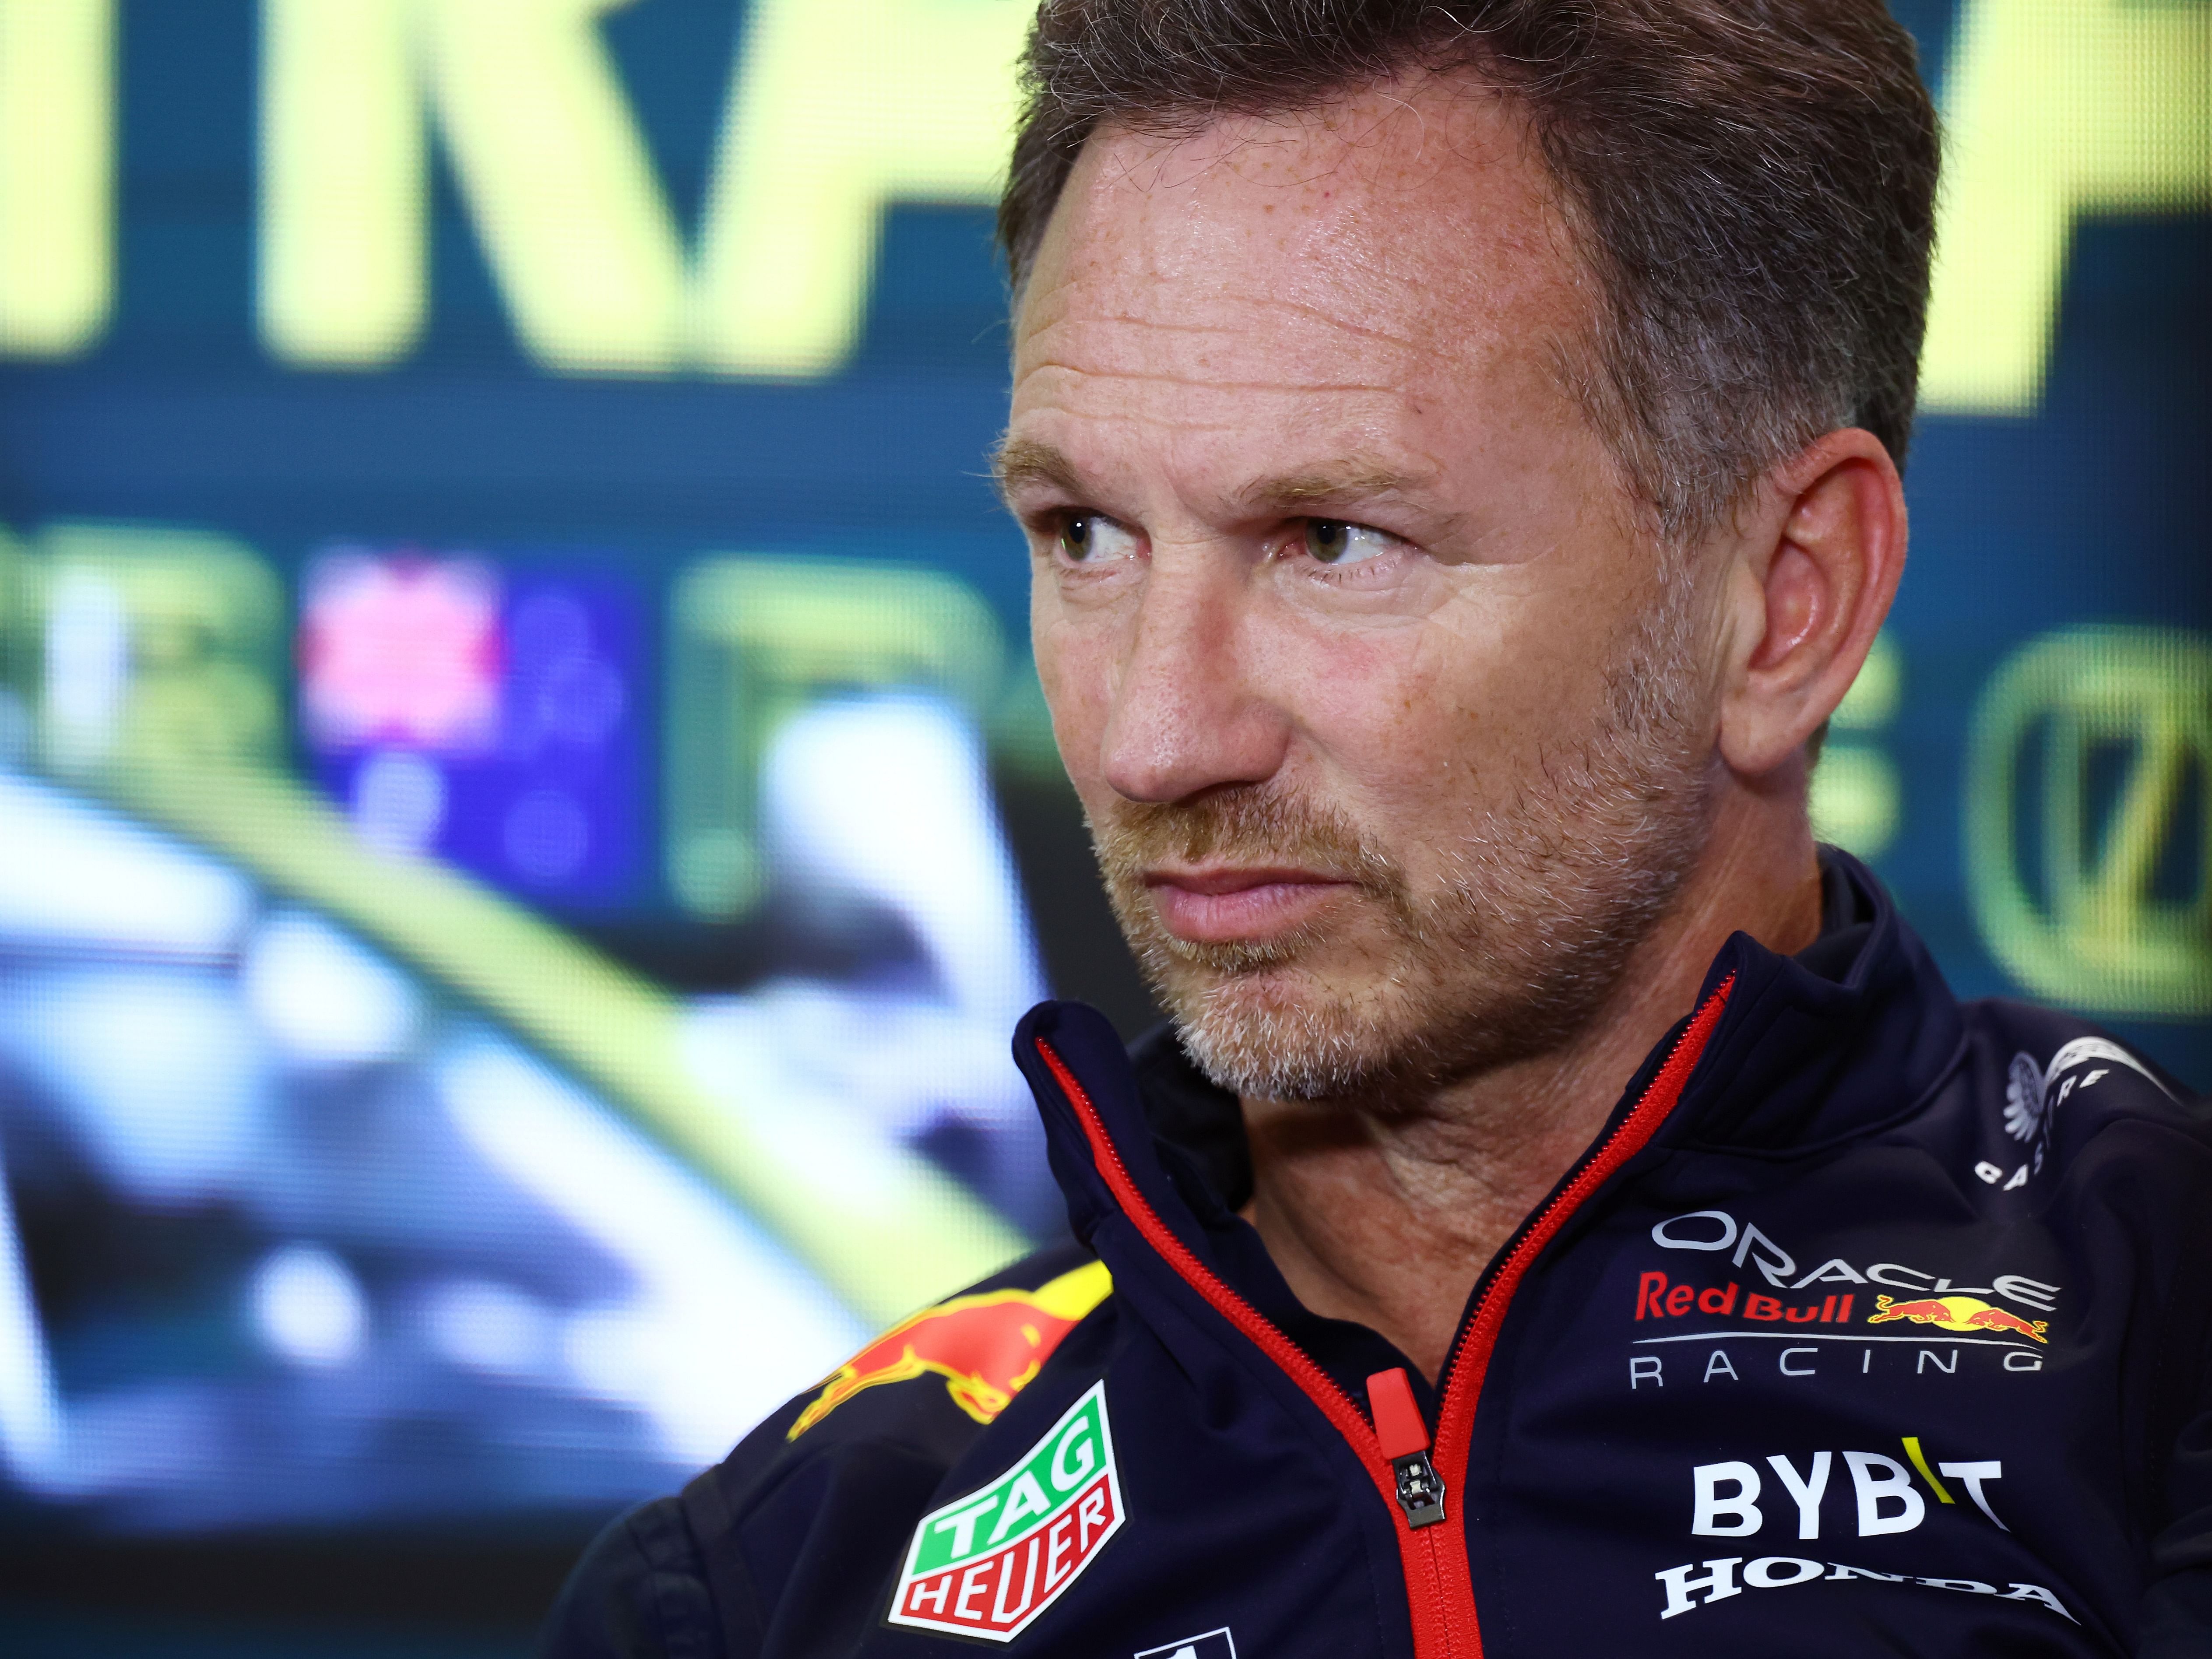 Red Bull Racing Team Principal Christian Horner looks on in the Team Principals Press Conference during practice ahead of the 2023 F1 Australian Grand Prix. (Photo by Dan Istitene/Getty Images)